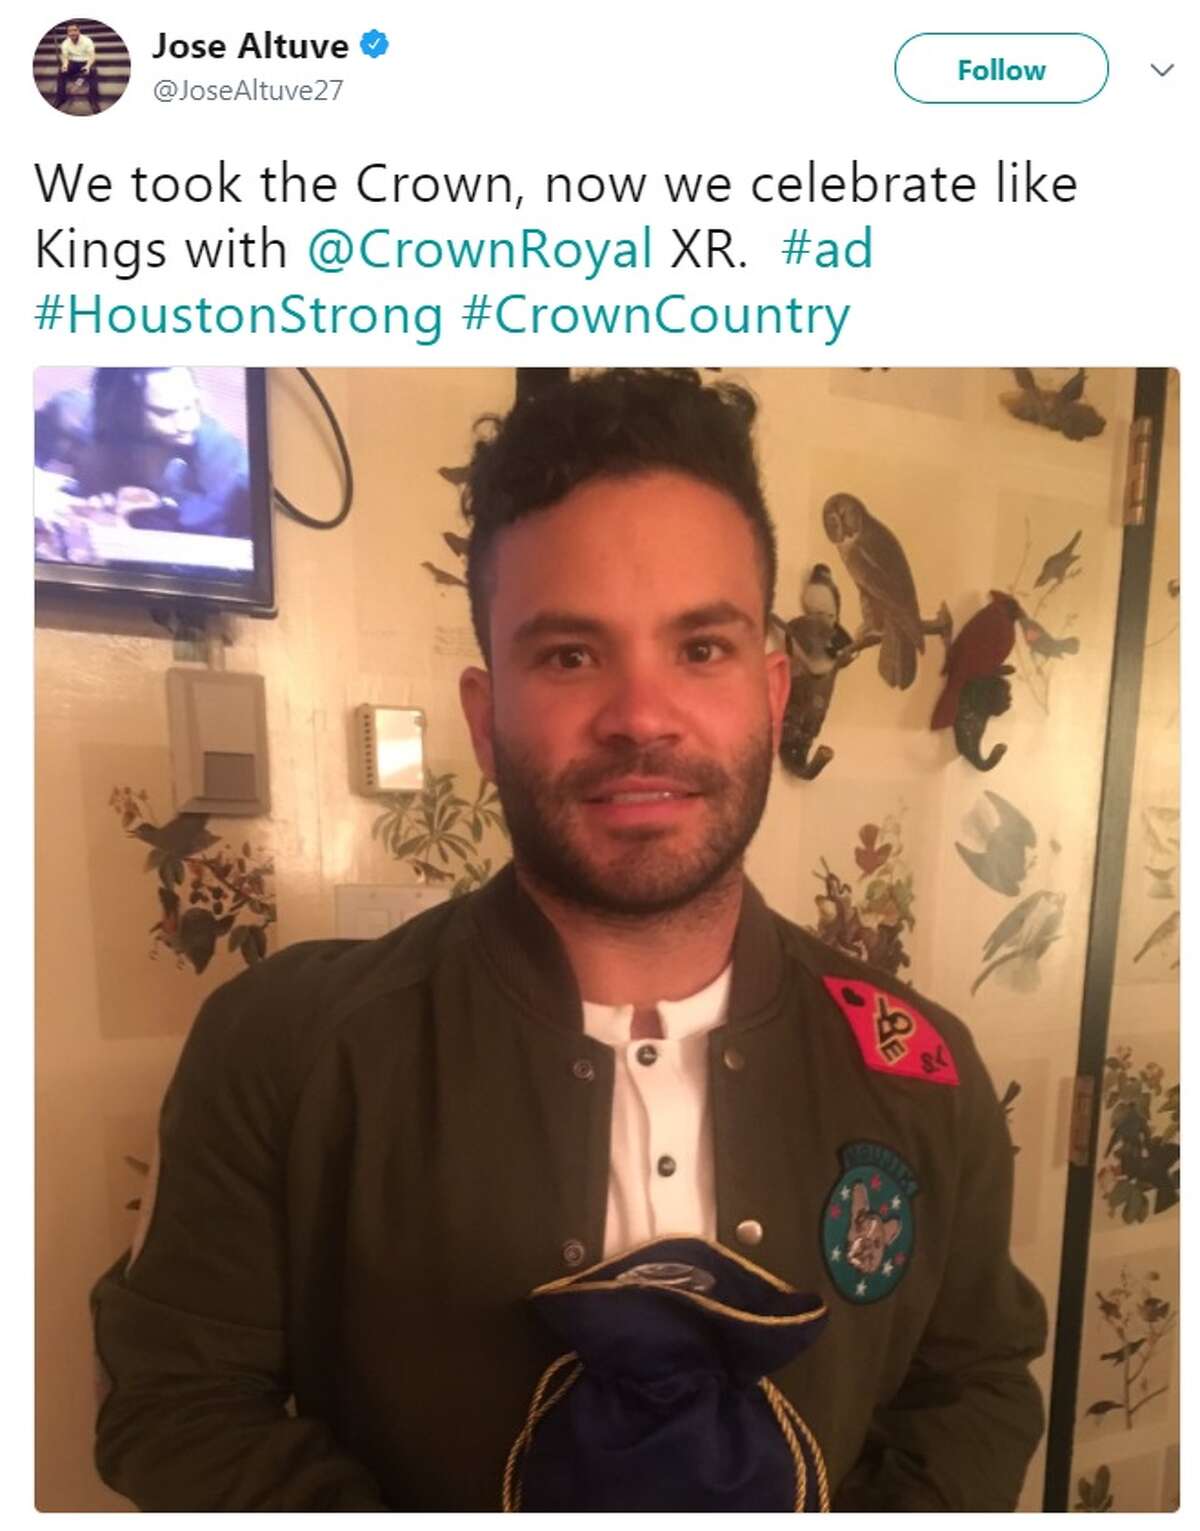 Jose Altuve shares his affection for Crown Royal whiskey with fellow Astros